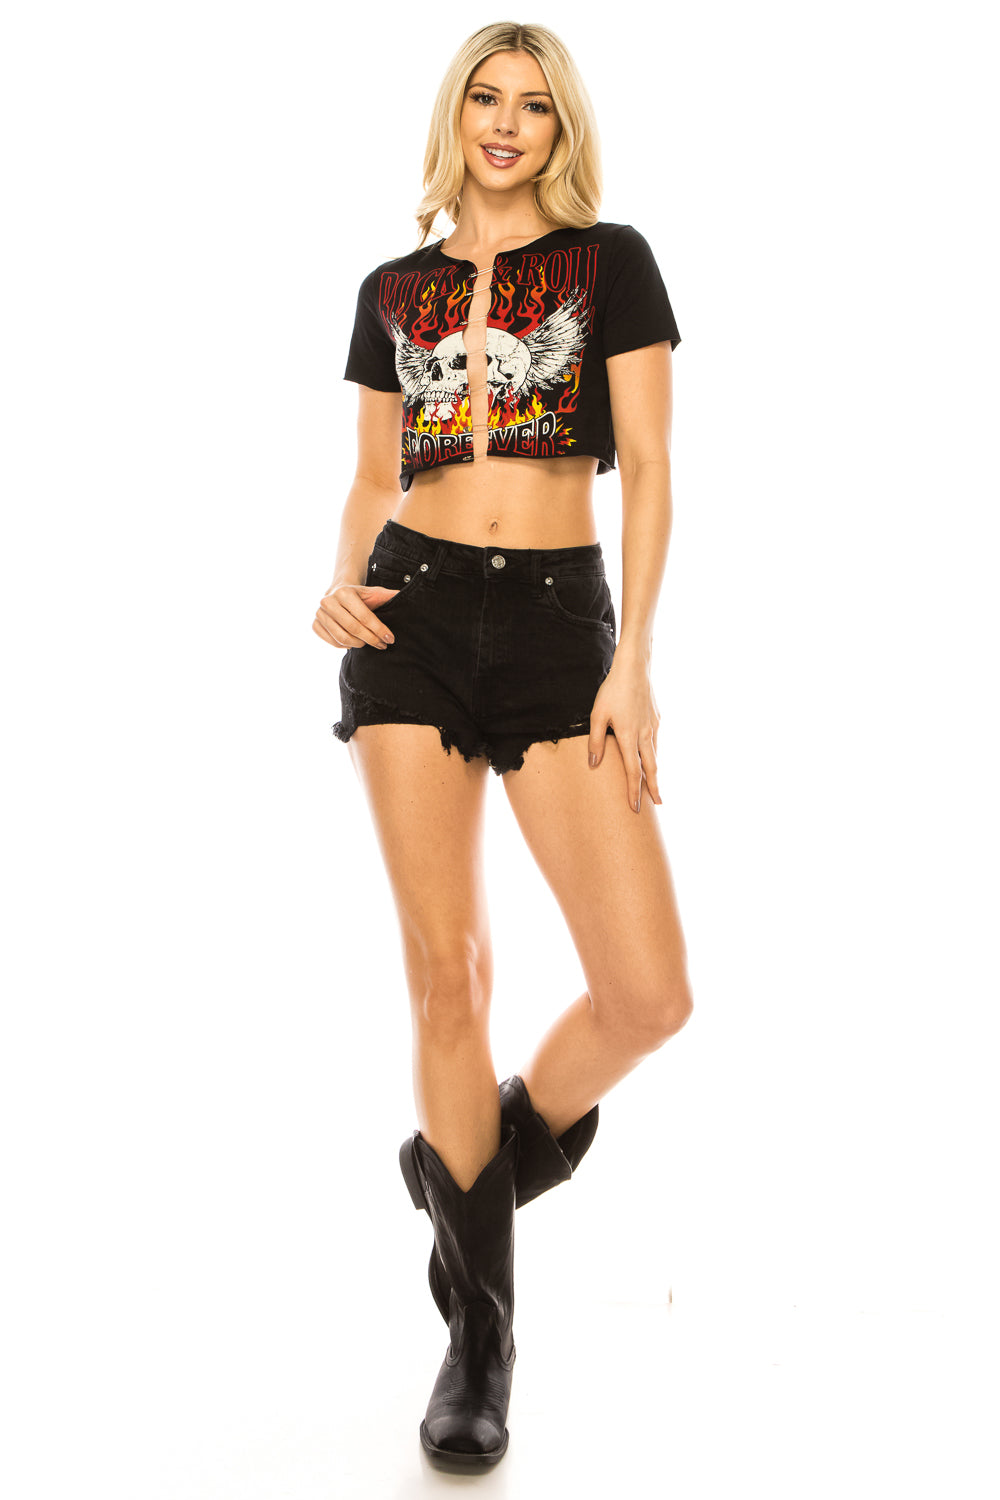 ROCK N ROLL FOREVER SAFETY PIN TOP - Trailsclothing.com